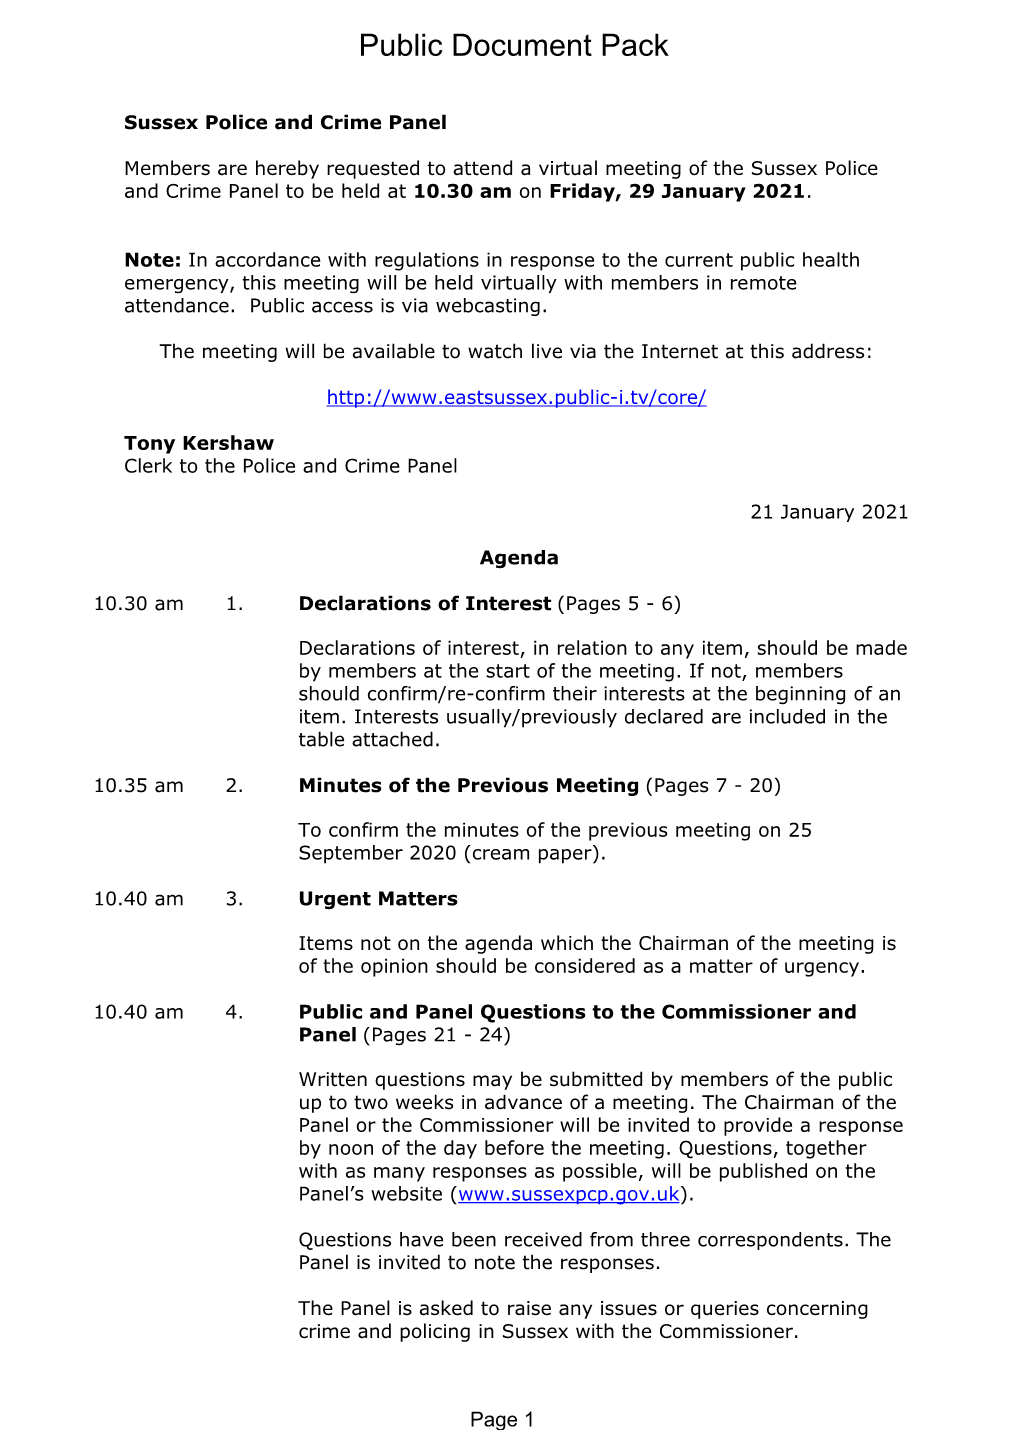 Agenda Document for Sussex Police and Crime Panel, 29/01/2021 10:30